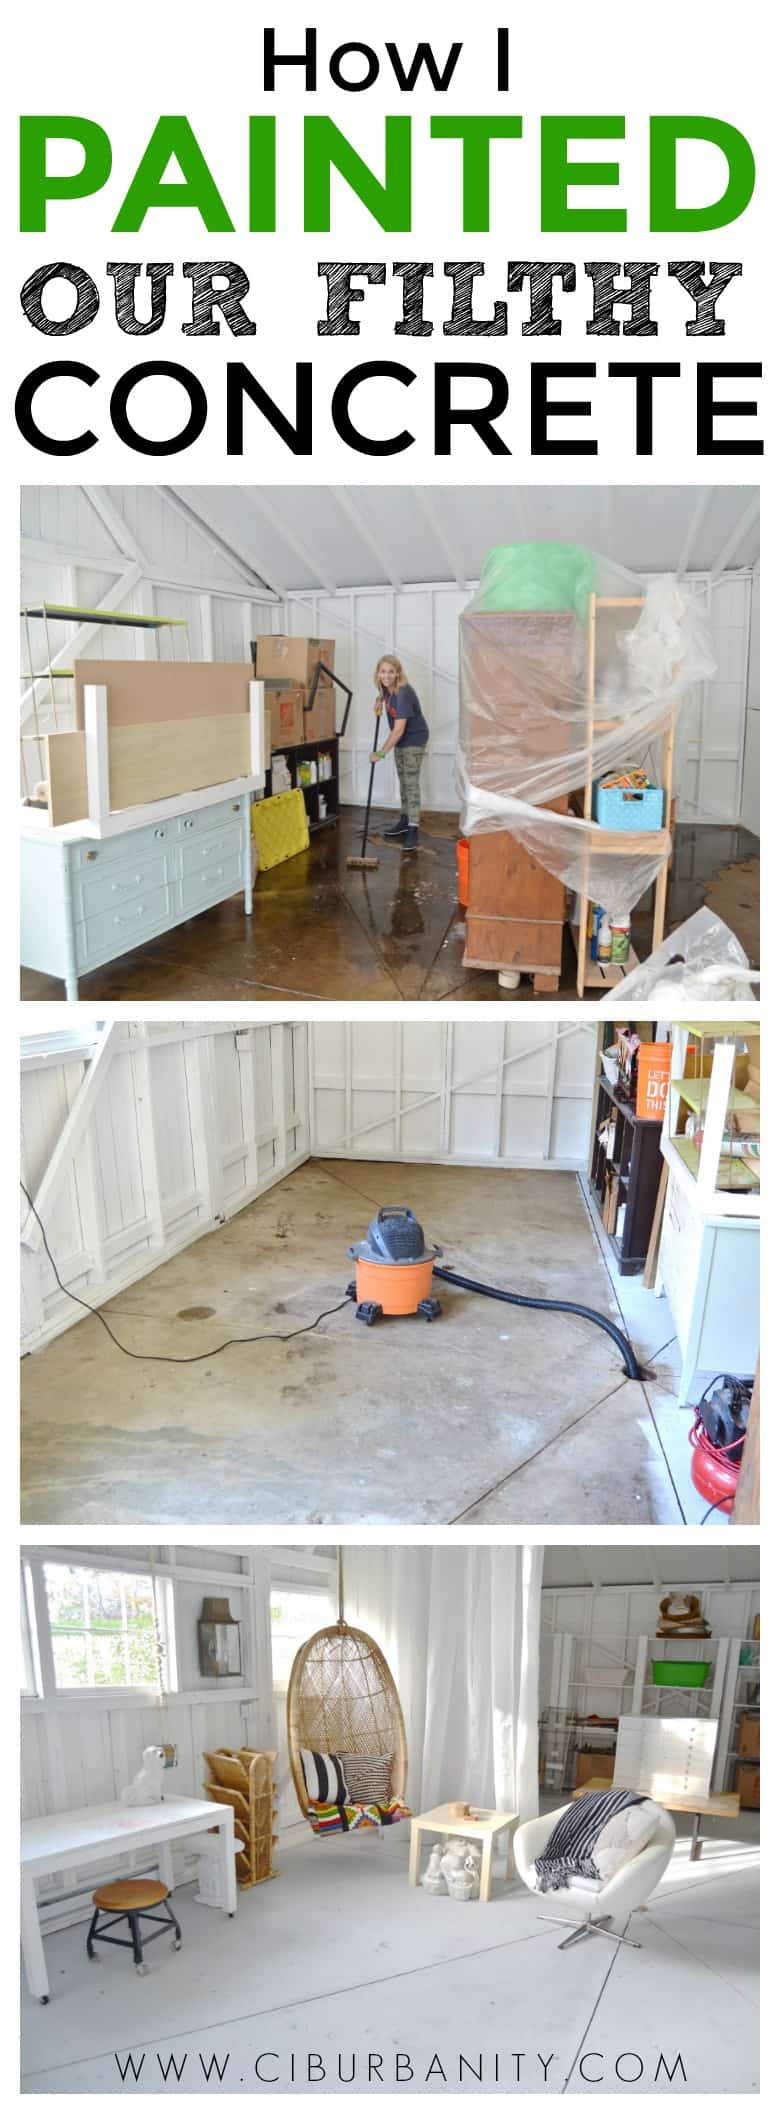 How to paint filthy concrete floors with only three small cans of paint!